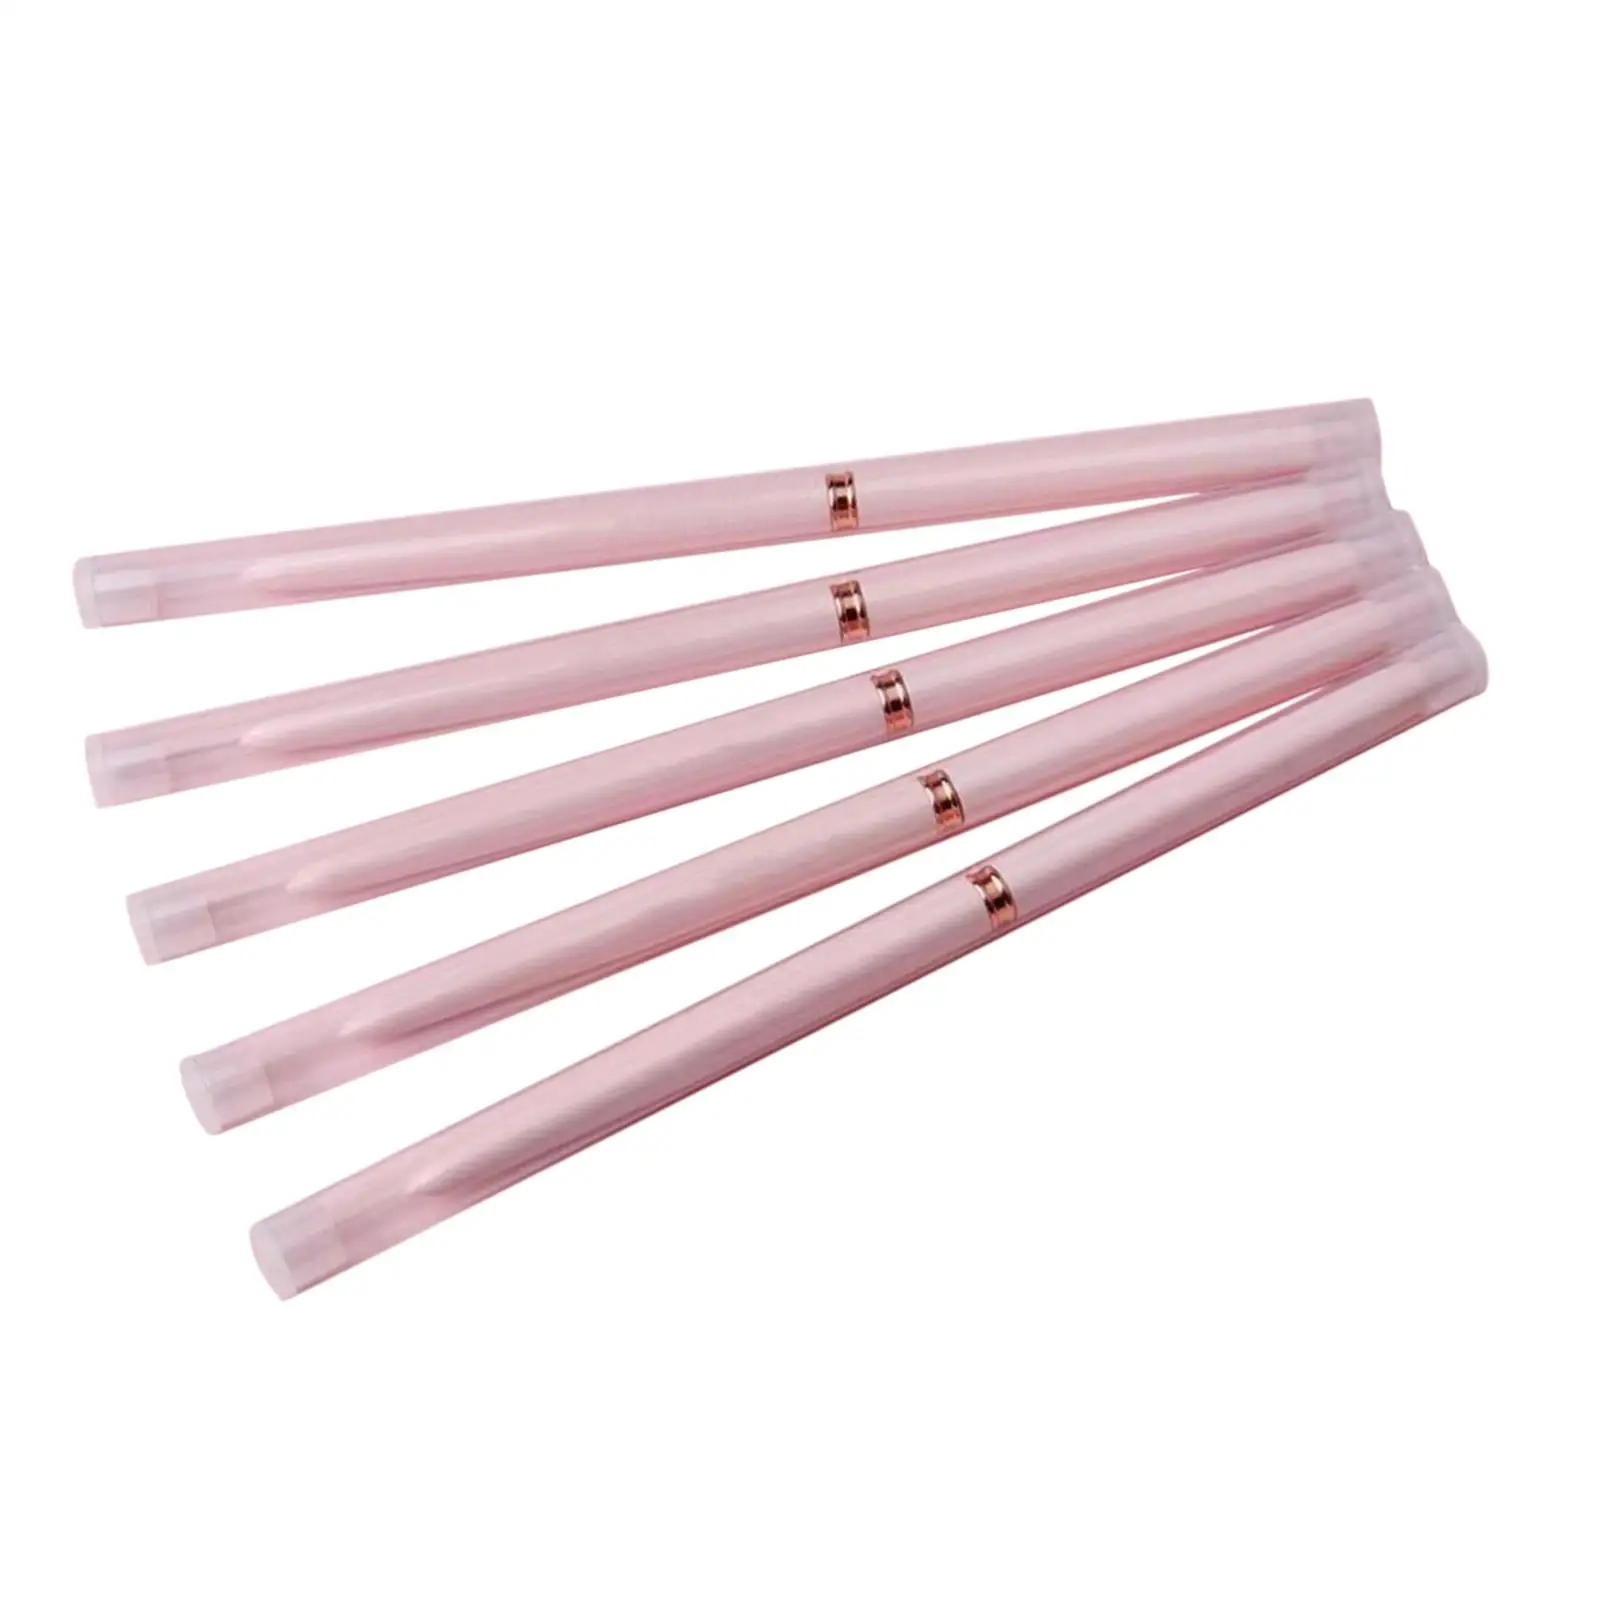 5 Pieces Nail Art Brushes Set Nail Art Painting Brushes Nail Design Brushes for Pulling Lines Delicate Coloring Fine Drawing